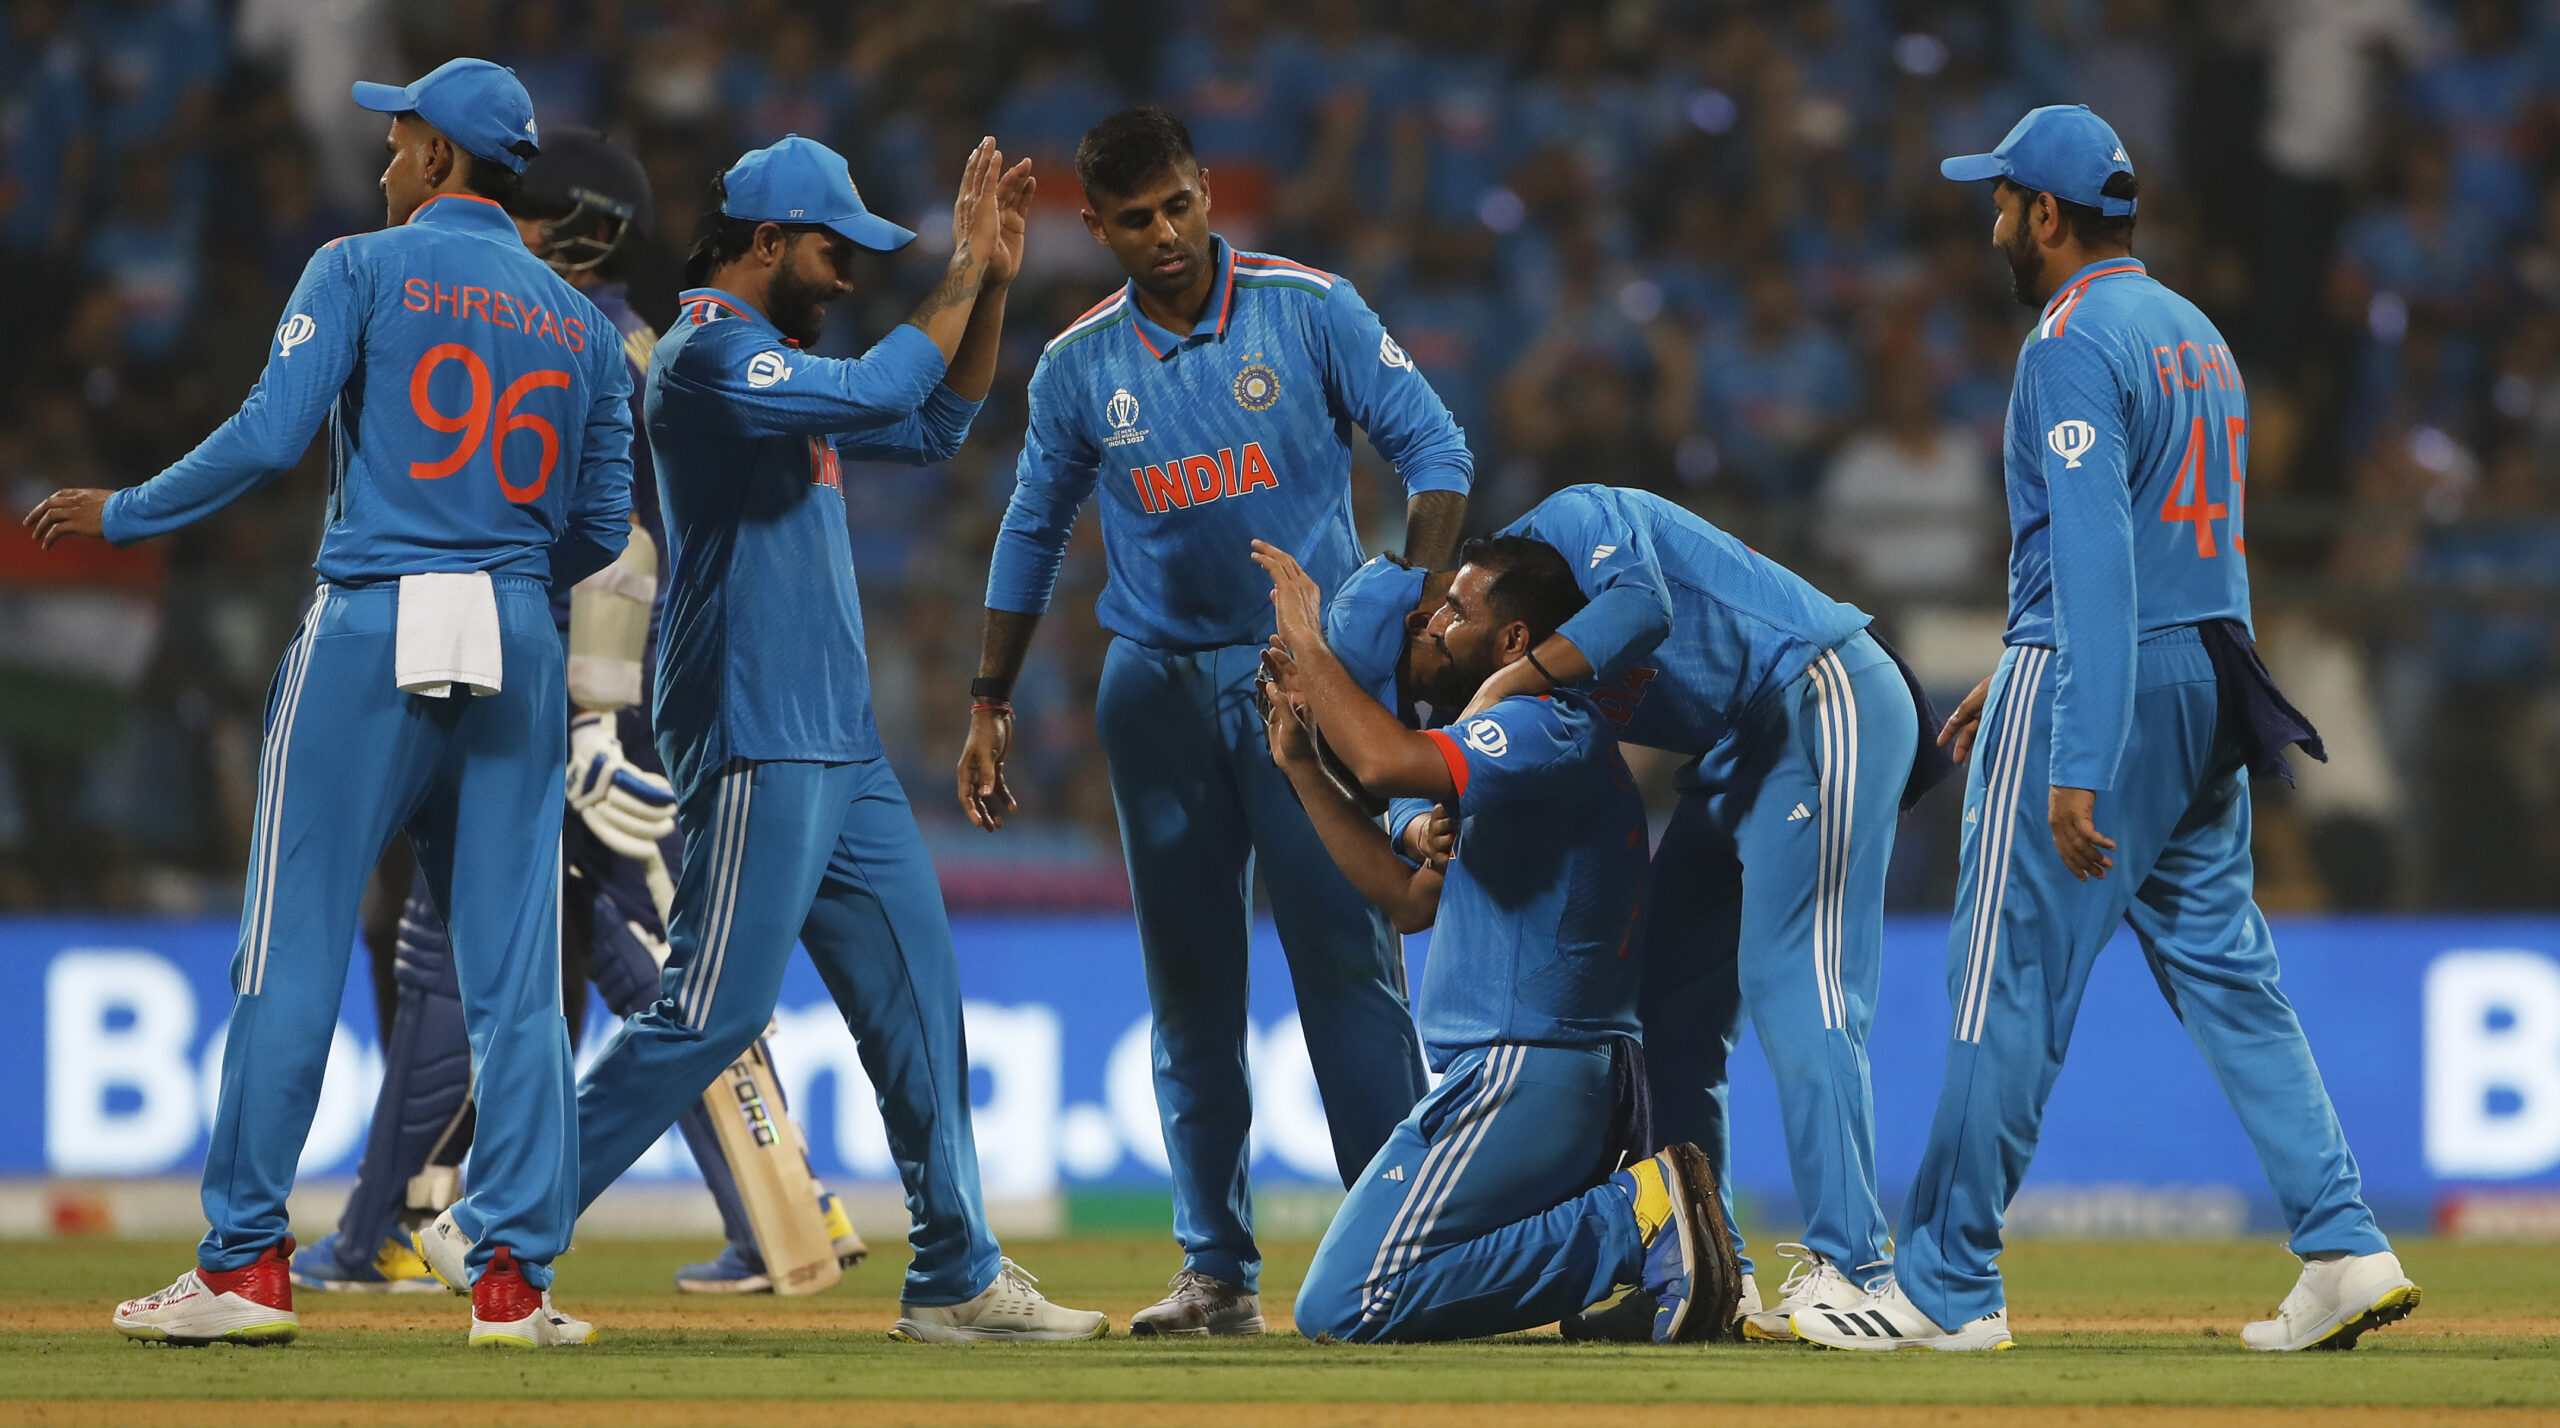 India qualify for semis after crushing 302-run win over Sri Lanka